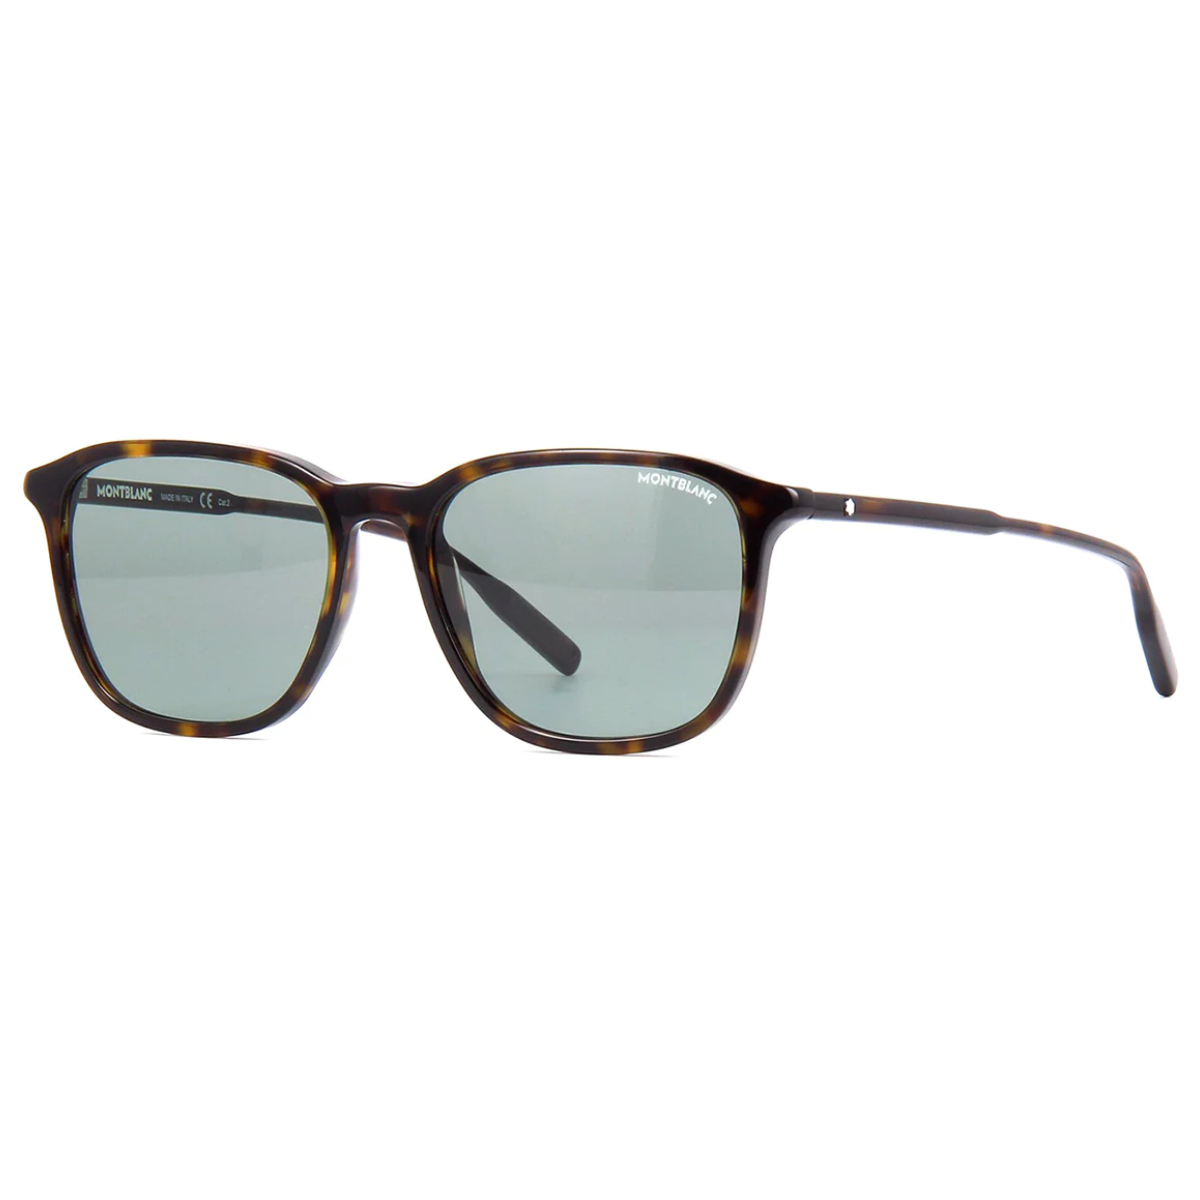 "Elevate your style with Mont Blanc MB0082S men's shell sunglasses from Optorium. Top branded, cool and fashionable shades."